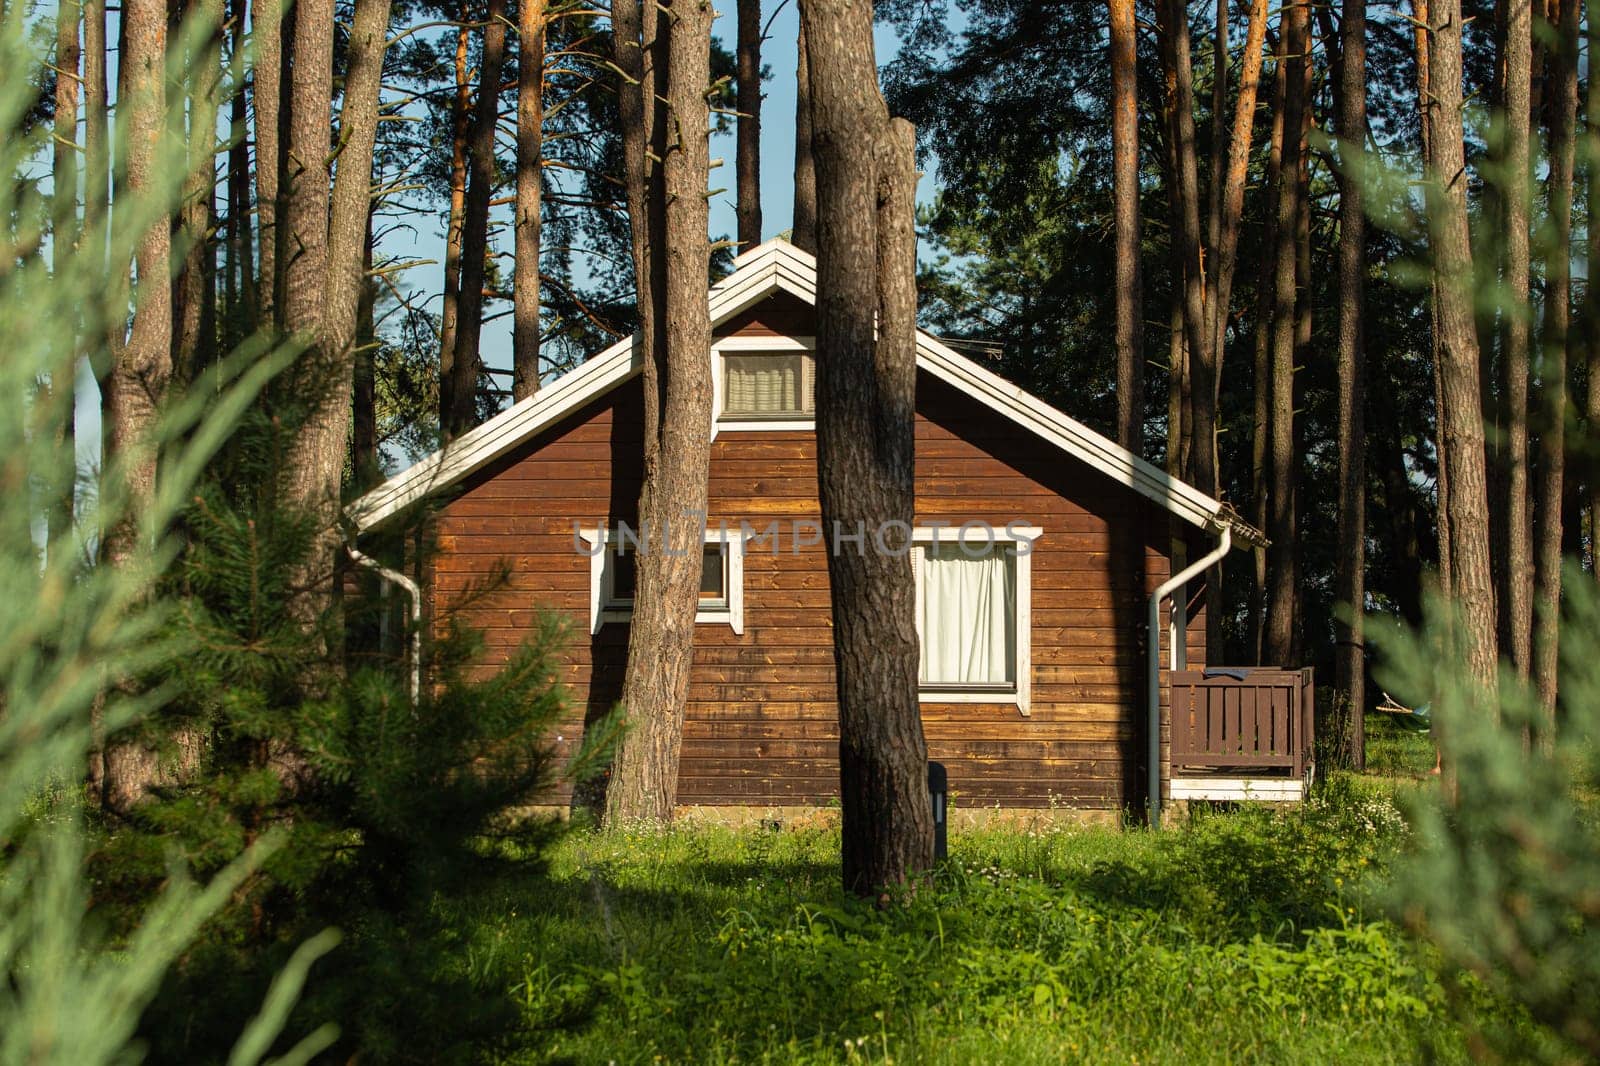 Cozy small wooden house cottage in a pines forest in summer. Rustic tranquil cabin retreat on nature rural area by its_al_dente